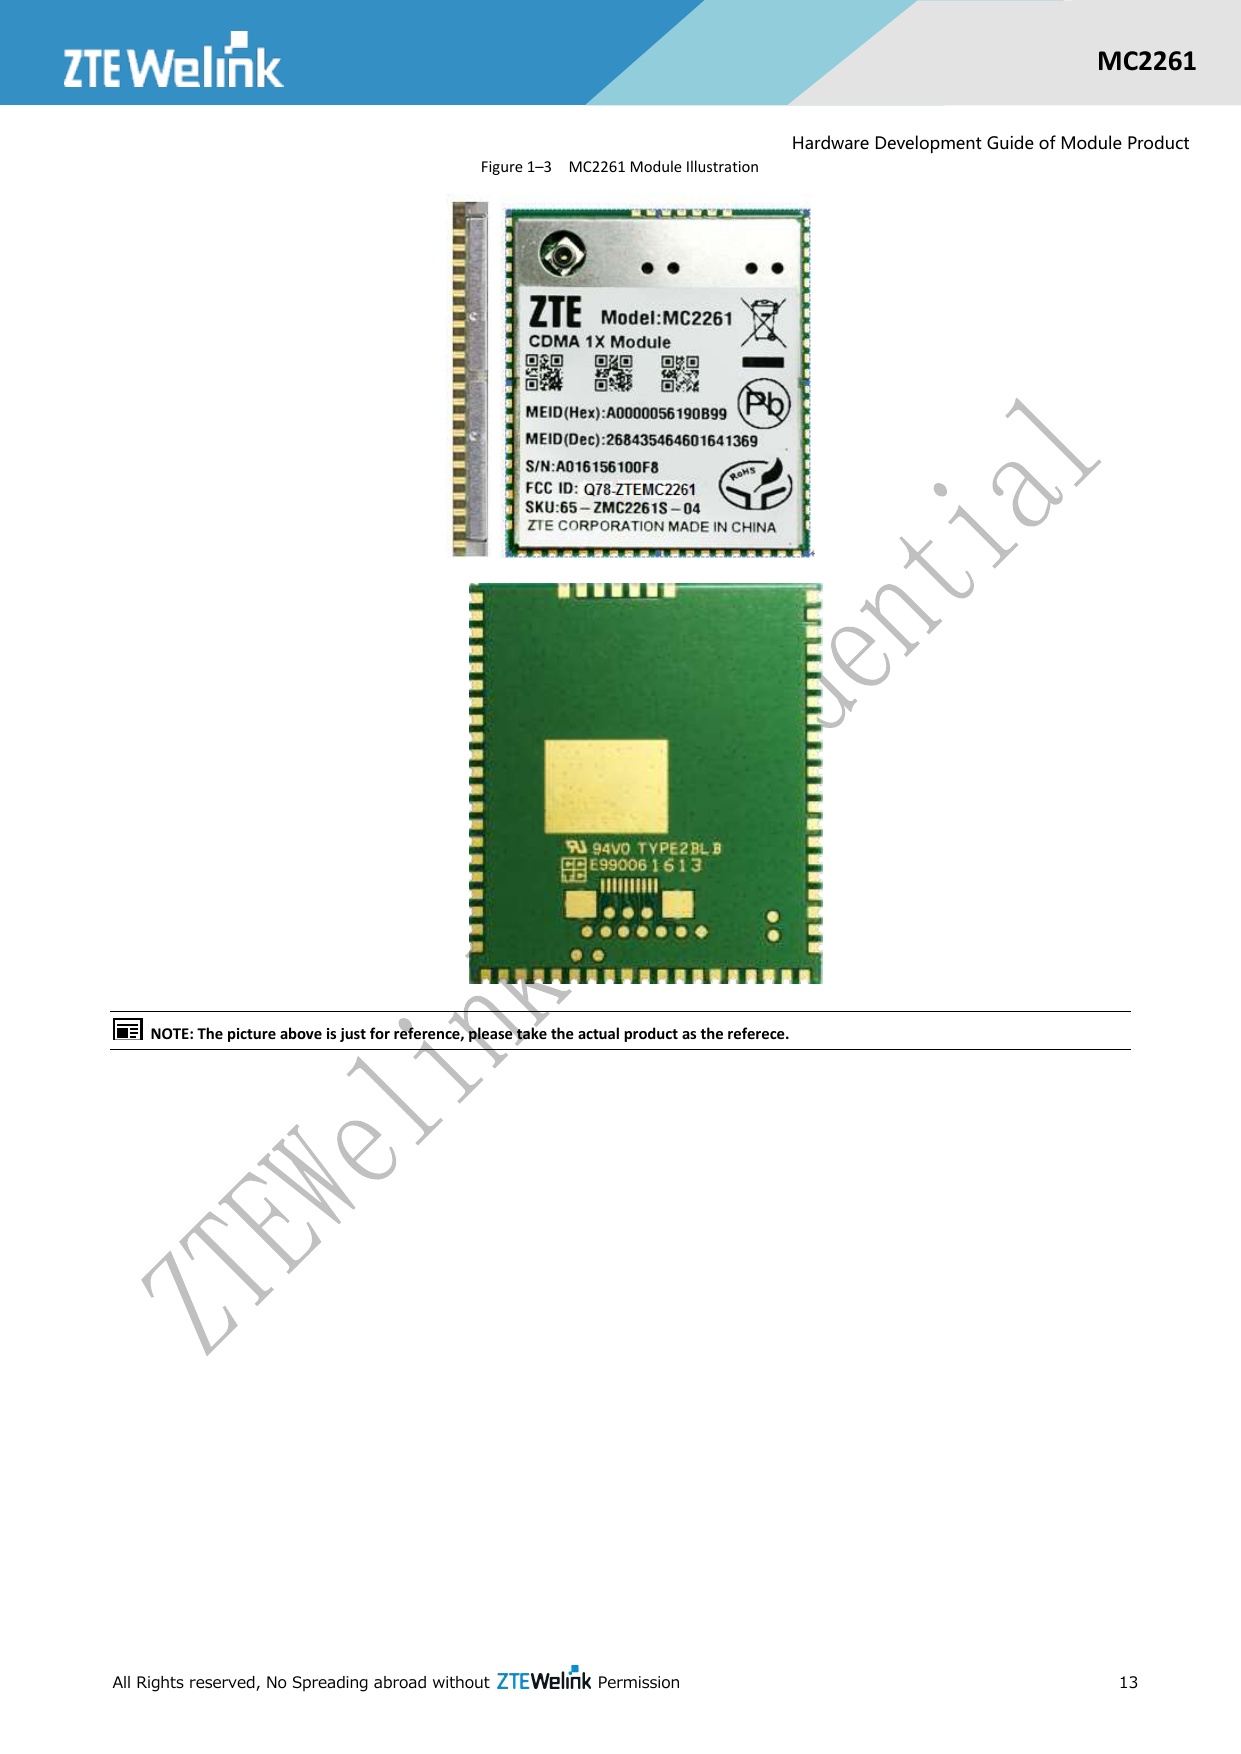  All Rights reserved, No Spreading abroad without    Permission      13  MC2261  Hardware Development Guide of Module Product Figure 1–3  MC2261 Module Illustration                  NOTE: The picture above is just for reference, please take the actual product as the referece. 